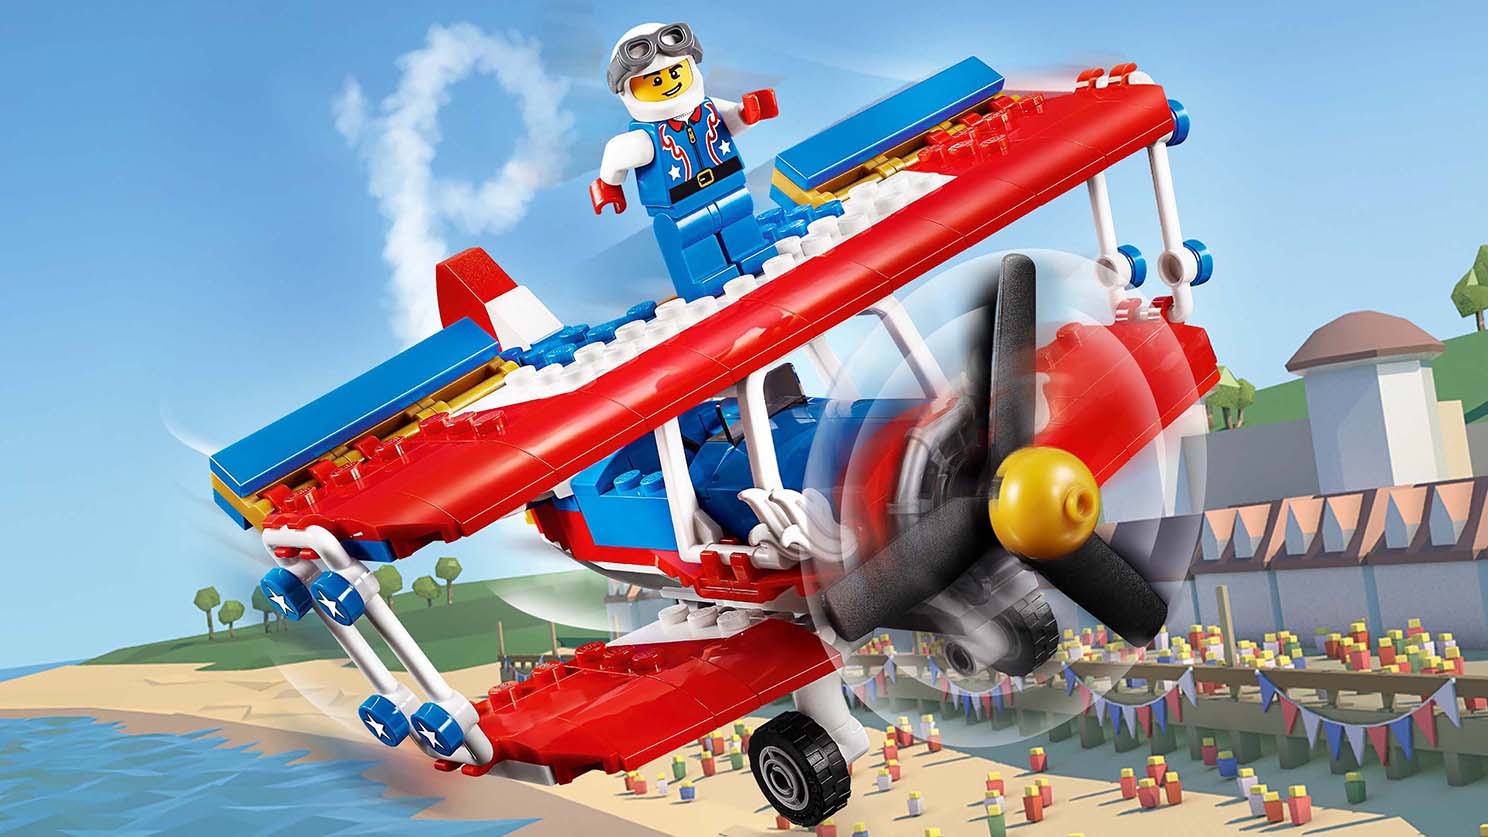 LEGO Creator 3-in-1 Daredevil Stunt Plane - 31076 - A daredevil is standing on the top wing of a flying stunt plane!